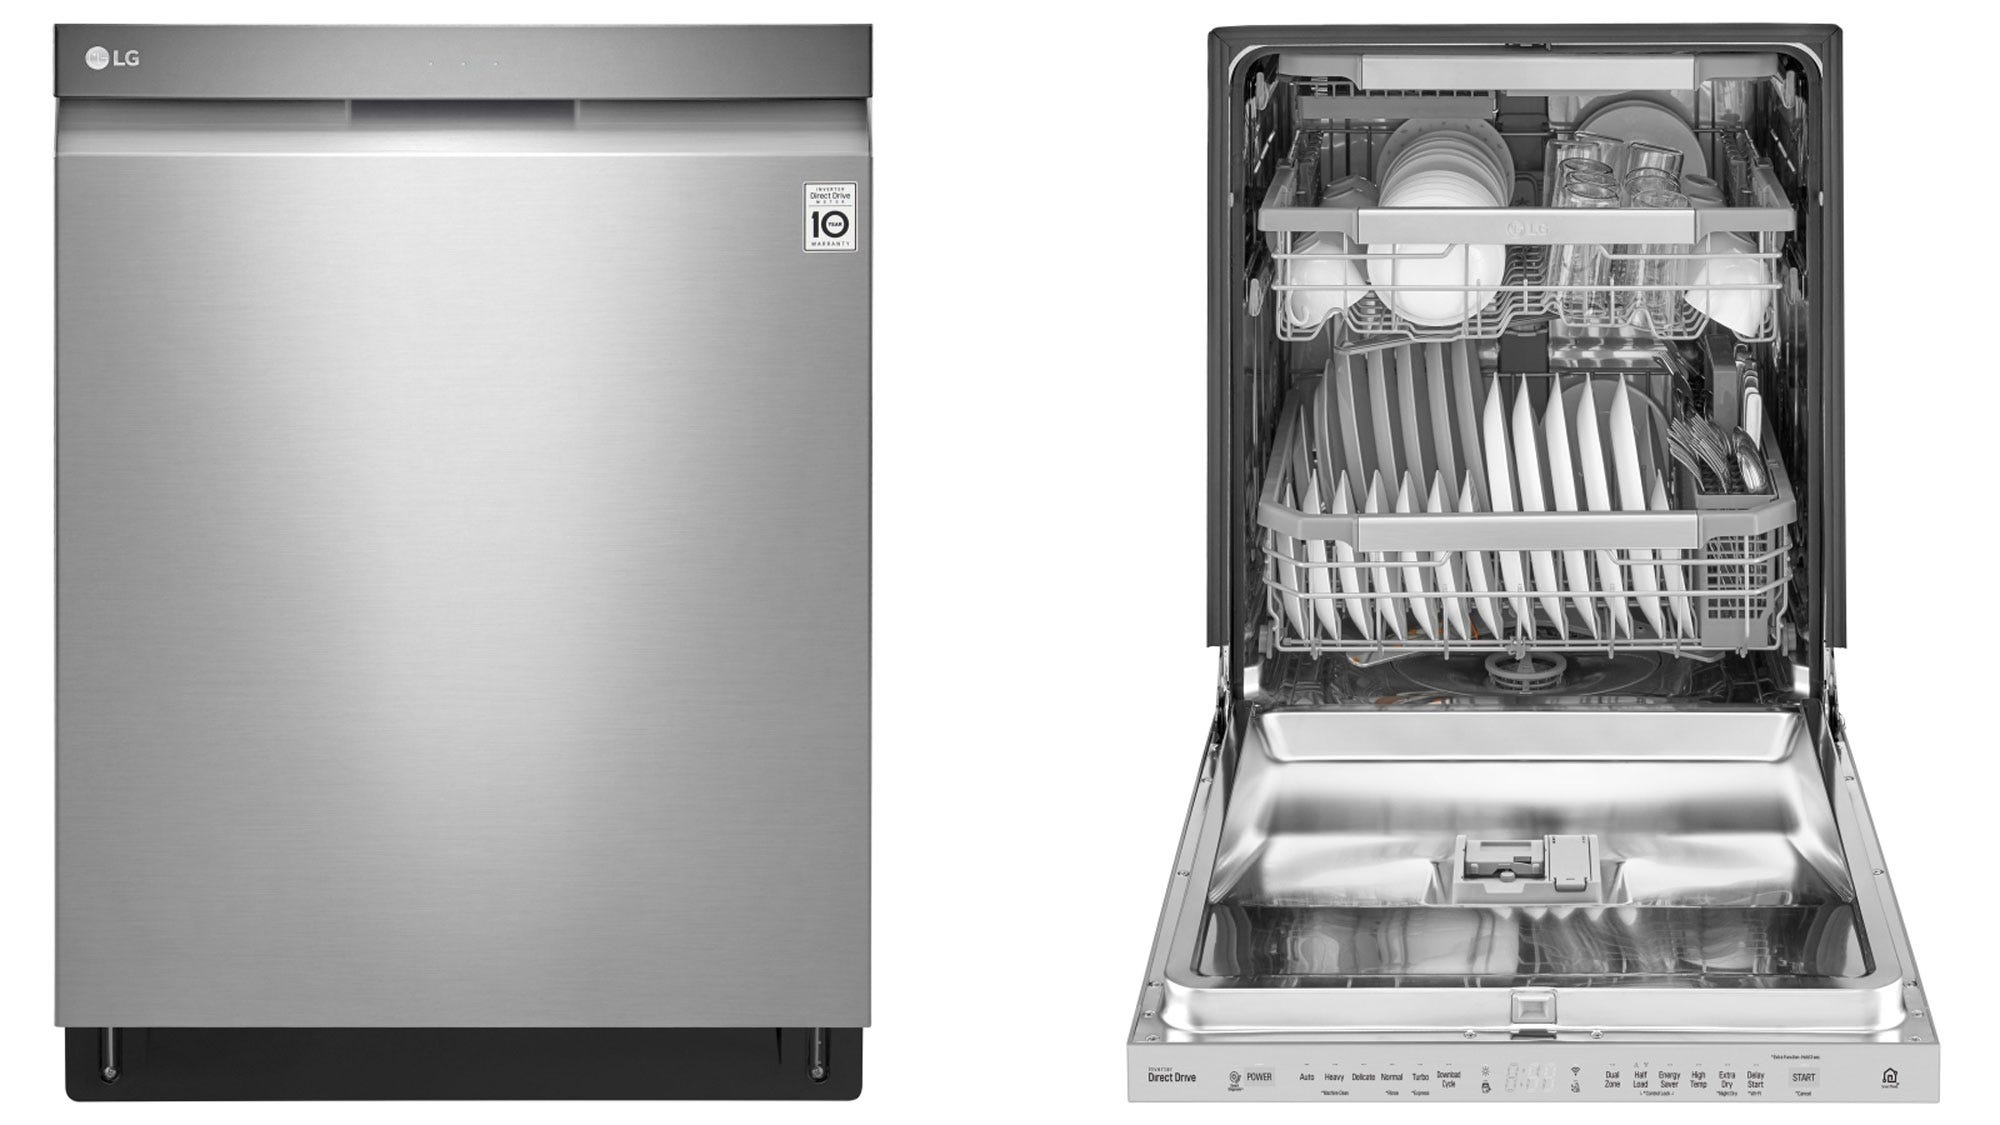 best consumer rated dishwasher